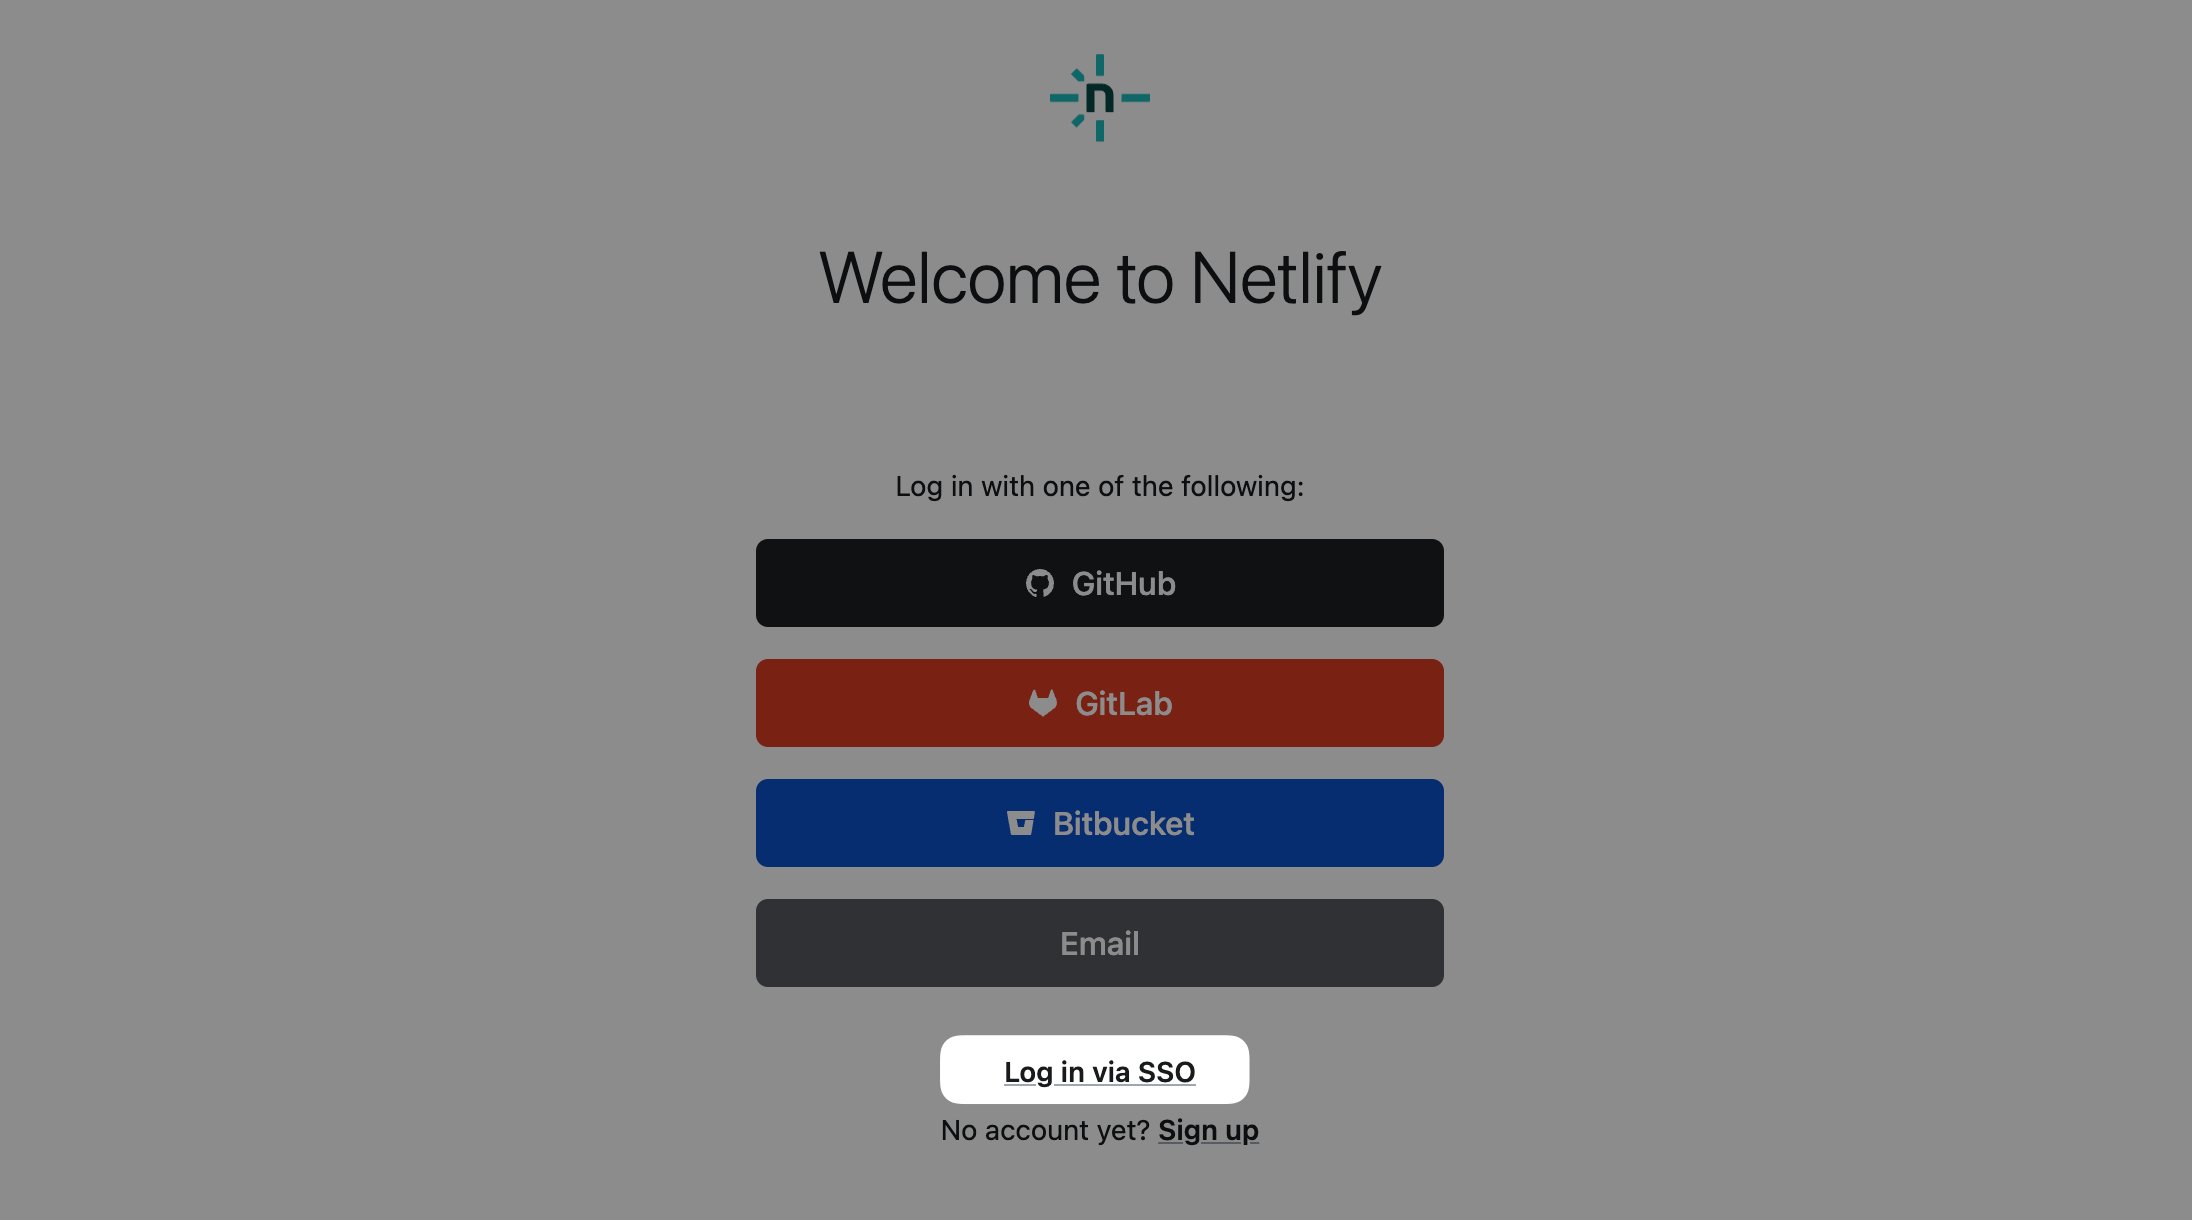 The standard Netlify login interface includes a link to log in using SSO.